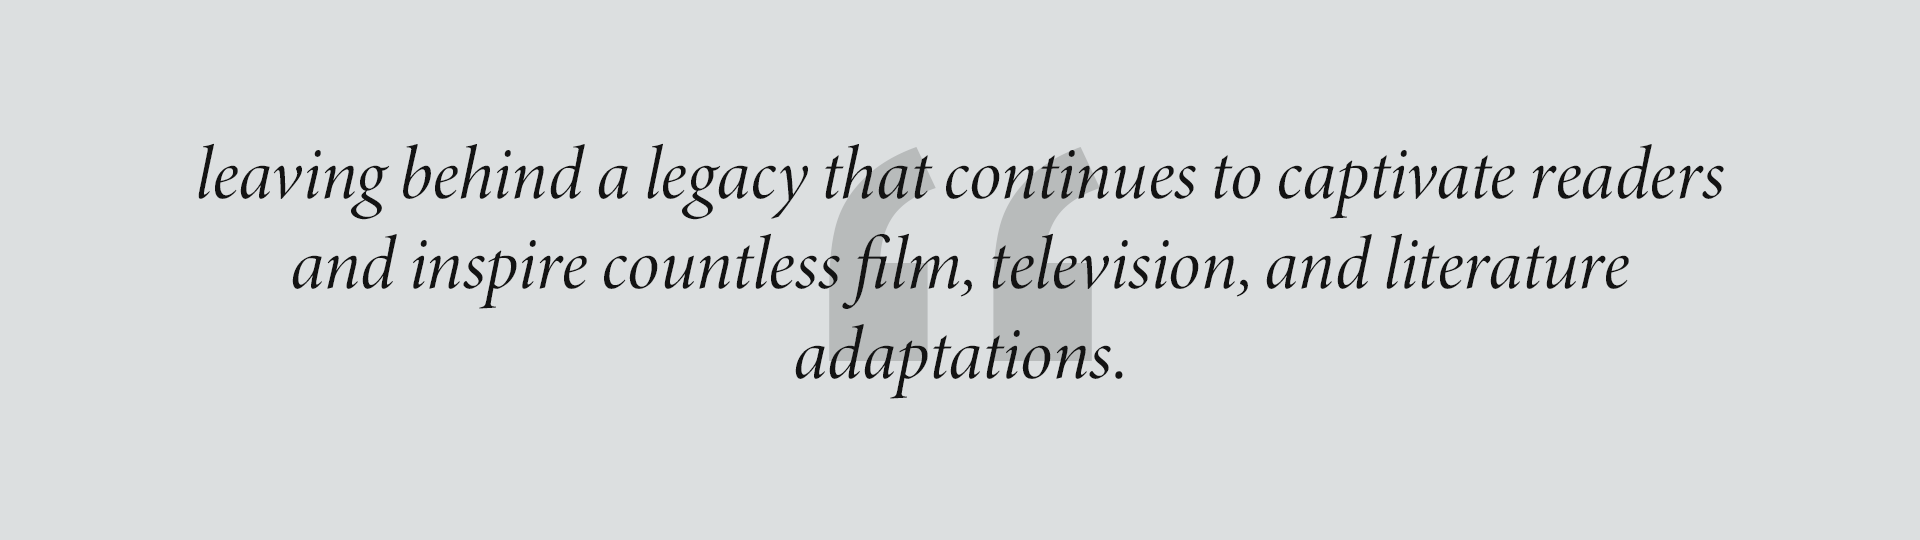 leaving behind a legacy that continues to captivate readers and inspire countless film, television, and literature
adaptations.